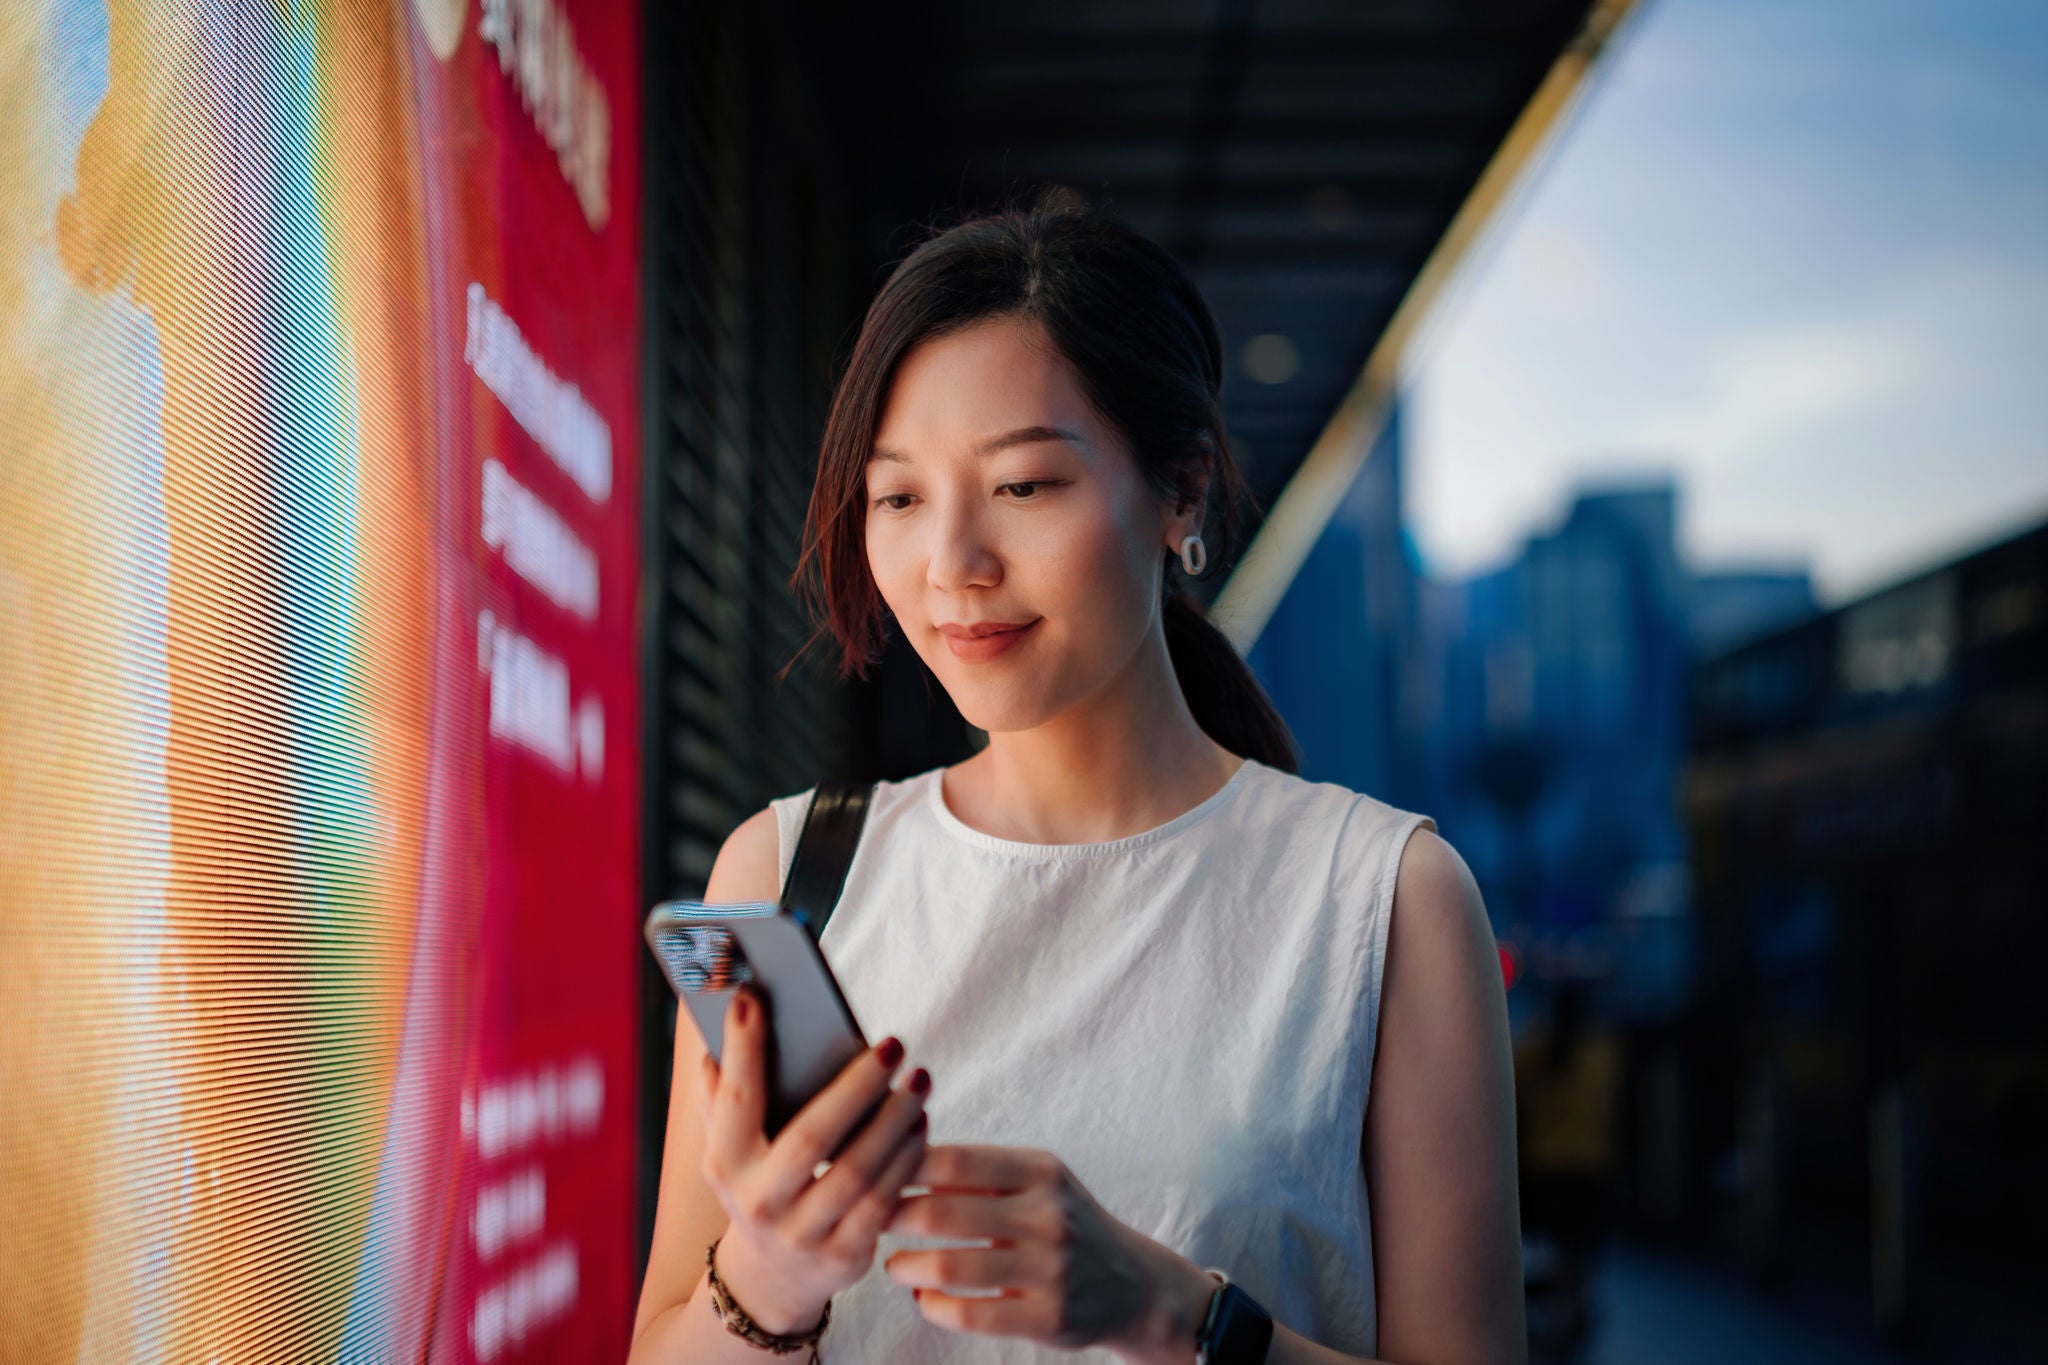 Confident young Asian businesswoman using smartphone in downtown city street in the evening, standing against illuminated LED digital display in the city. Lifestyle and technology